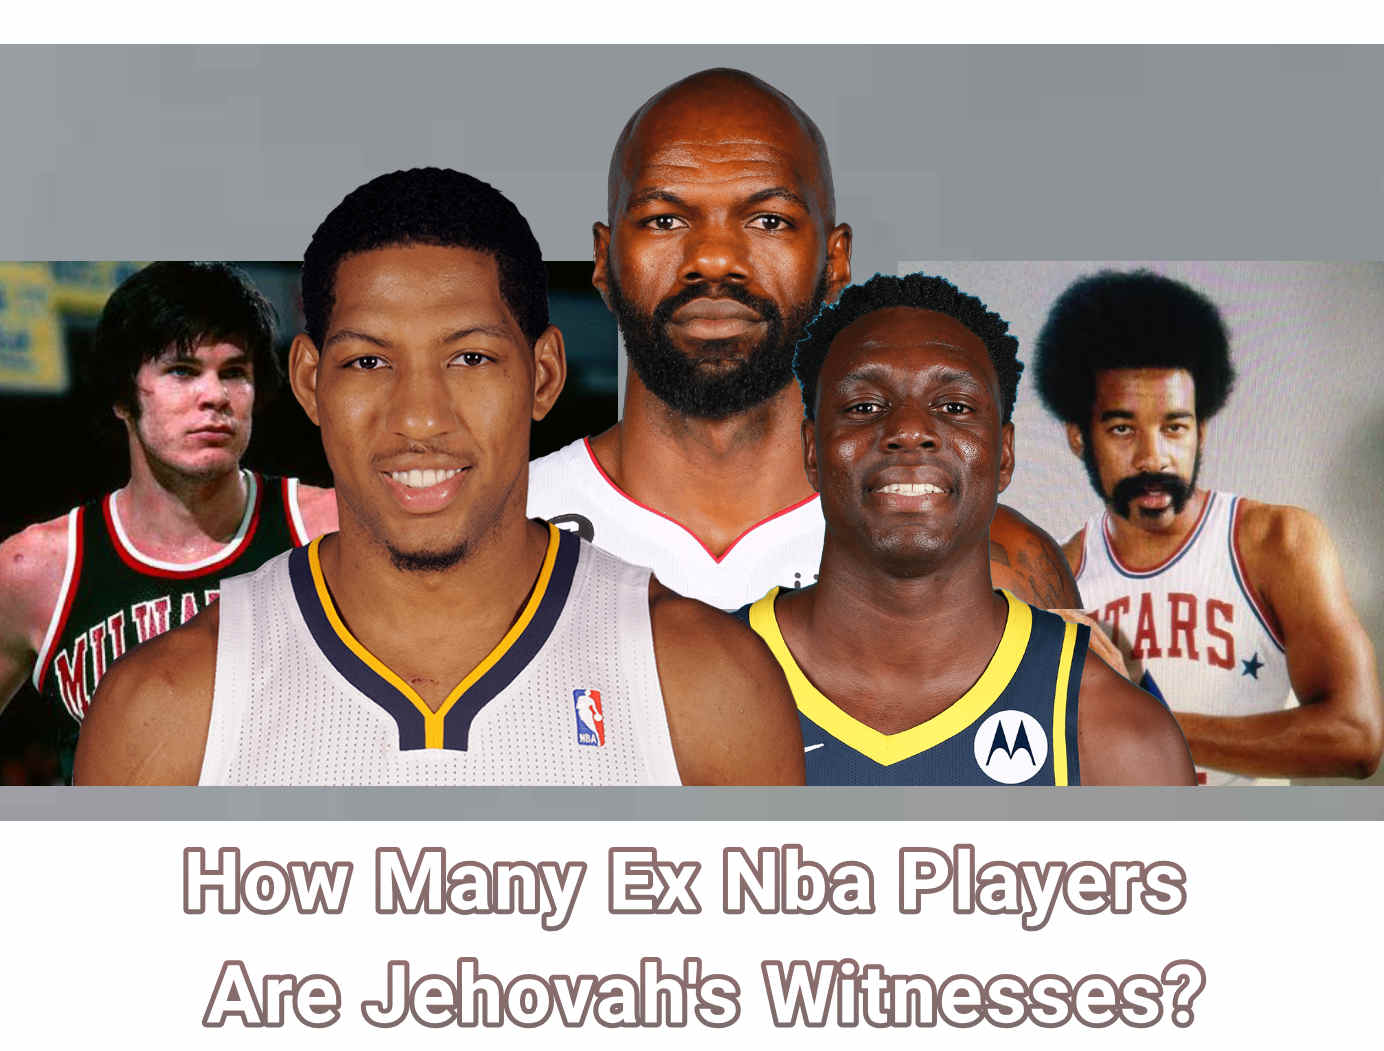 How Many Ex NBA Players Are Jehovah's Witnesses